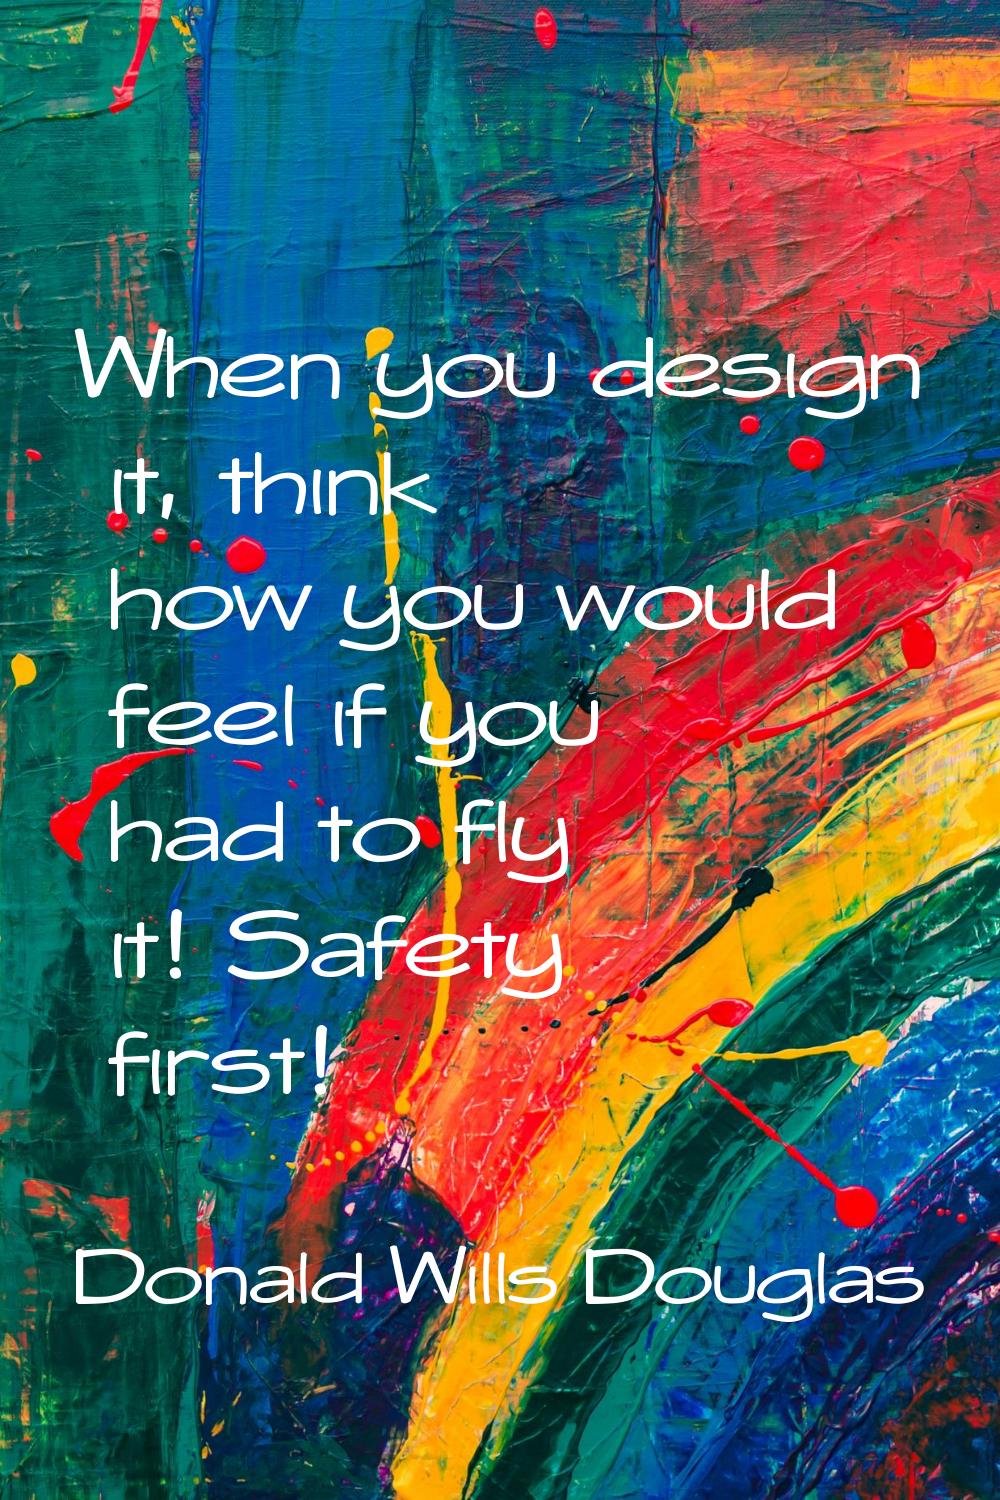 When you design it, think how you would feel if you had to fly it! Safety first!